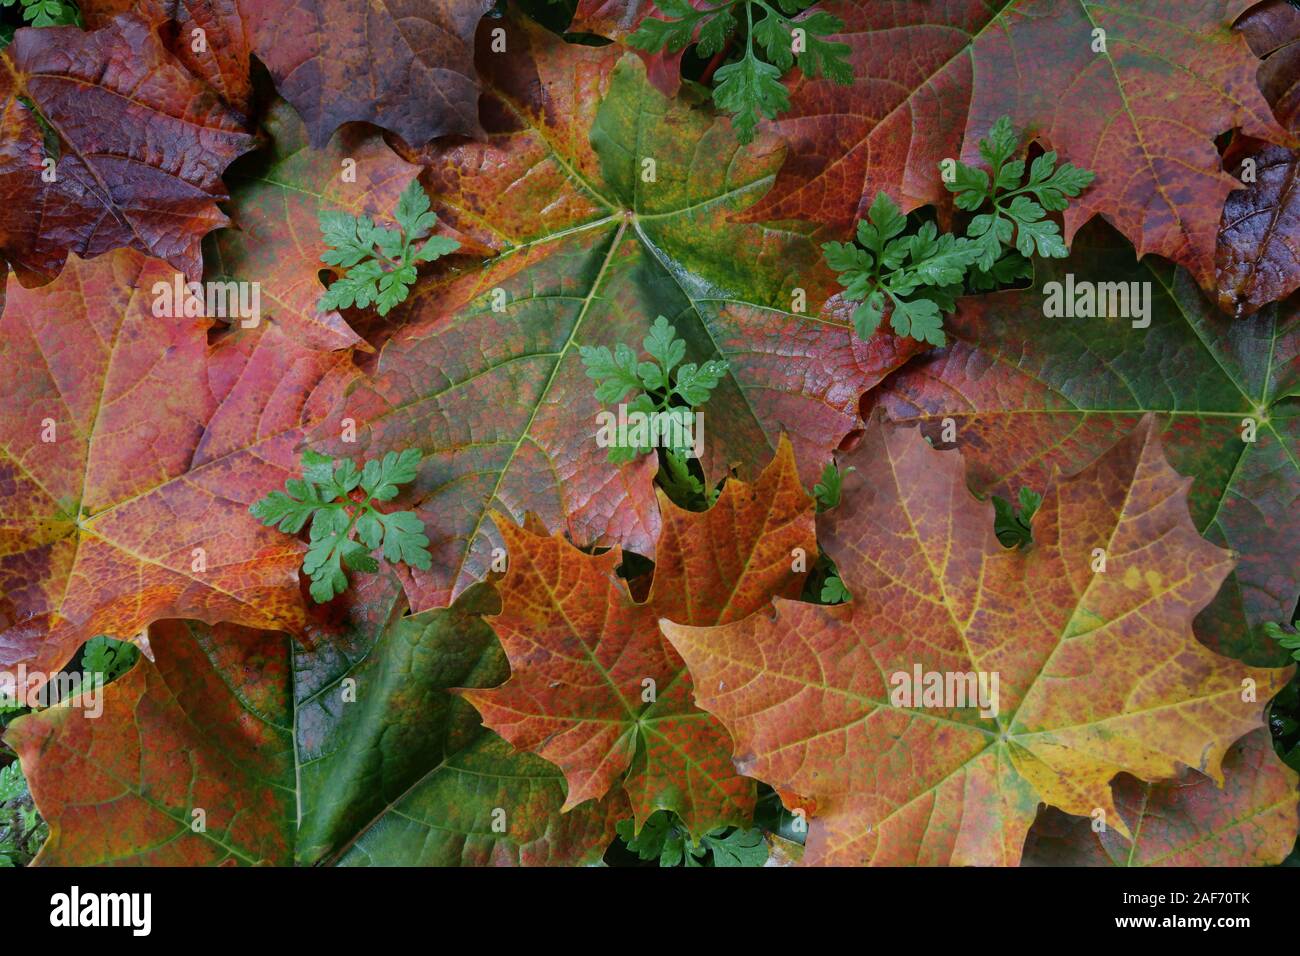 A close-up view of colorful fallen leaves. Stock Photo